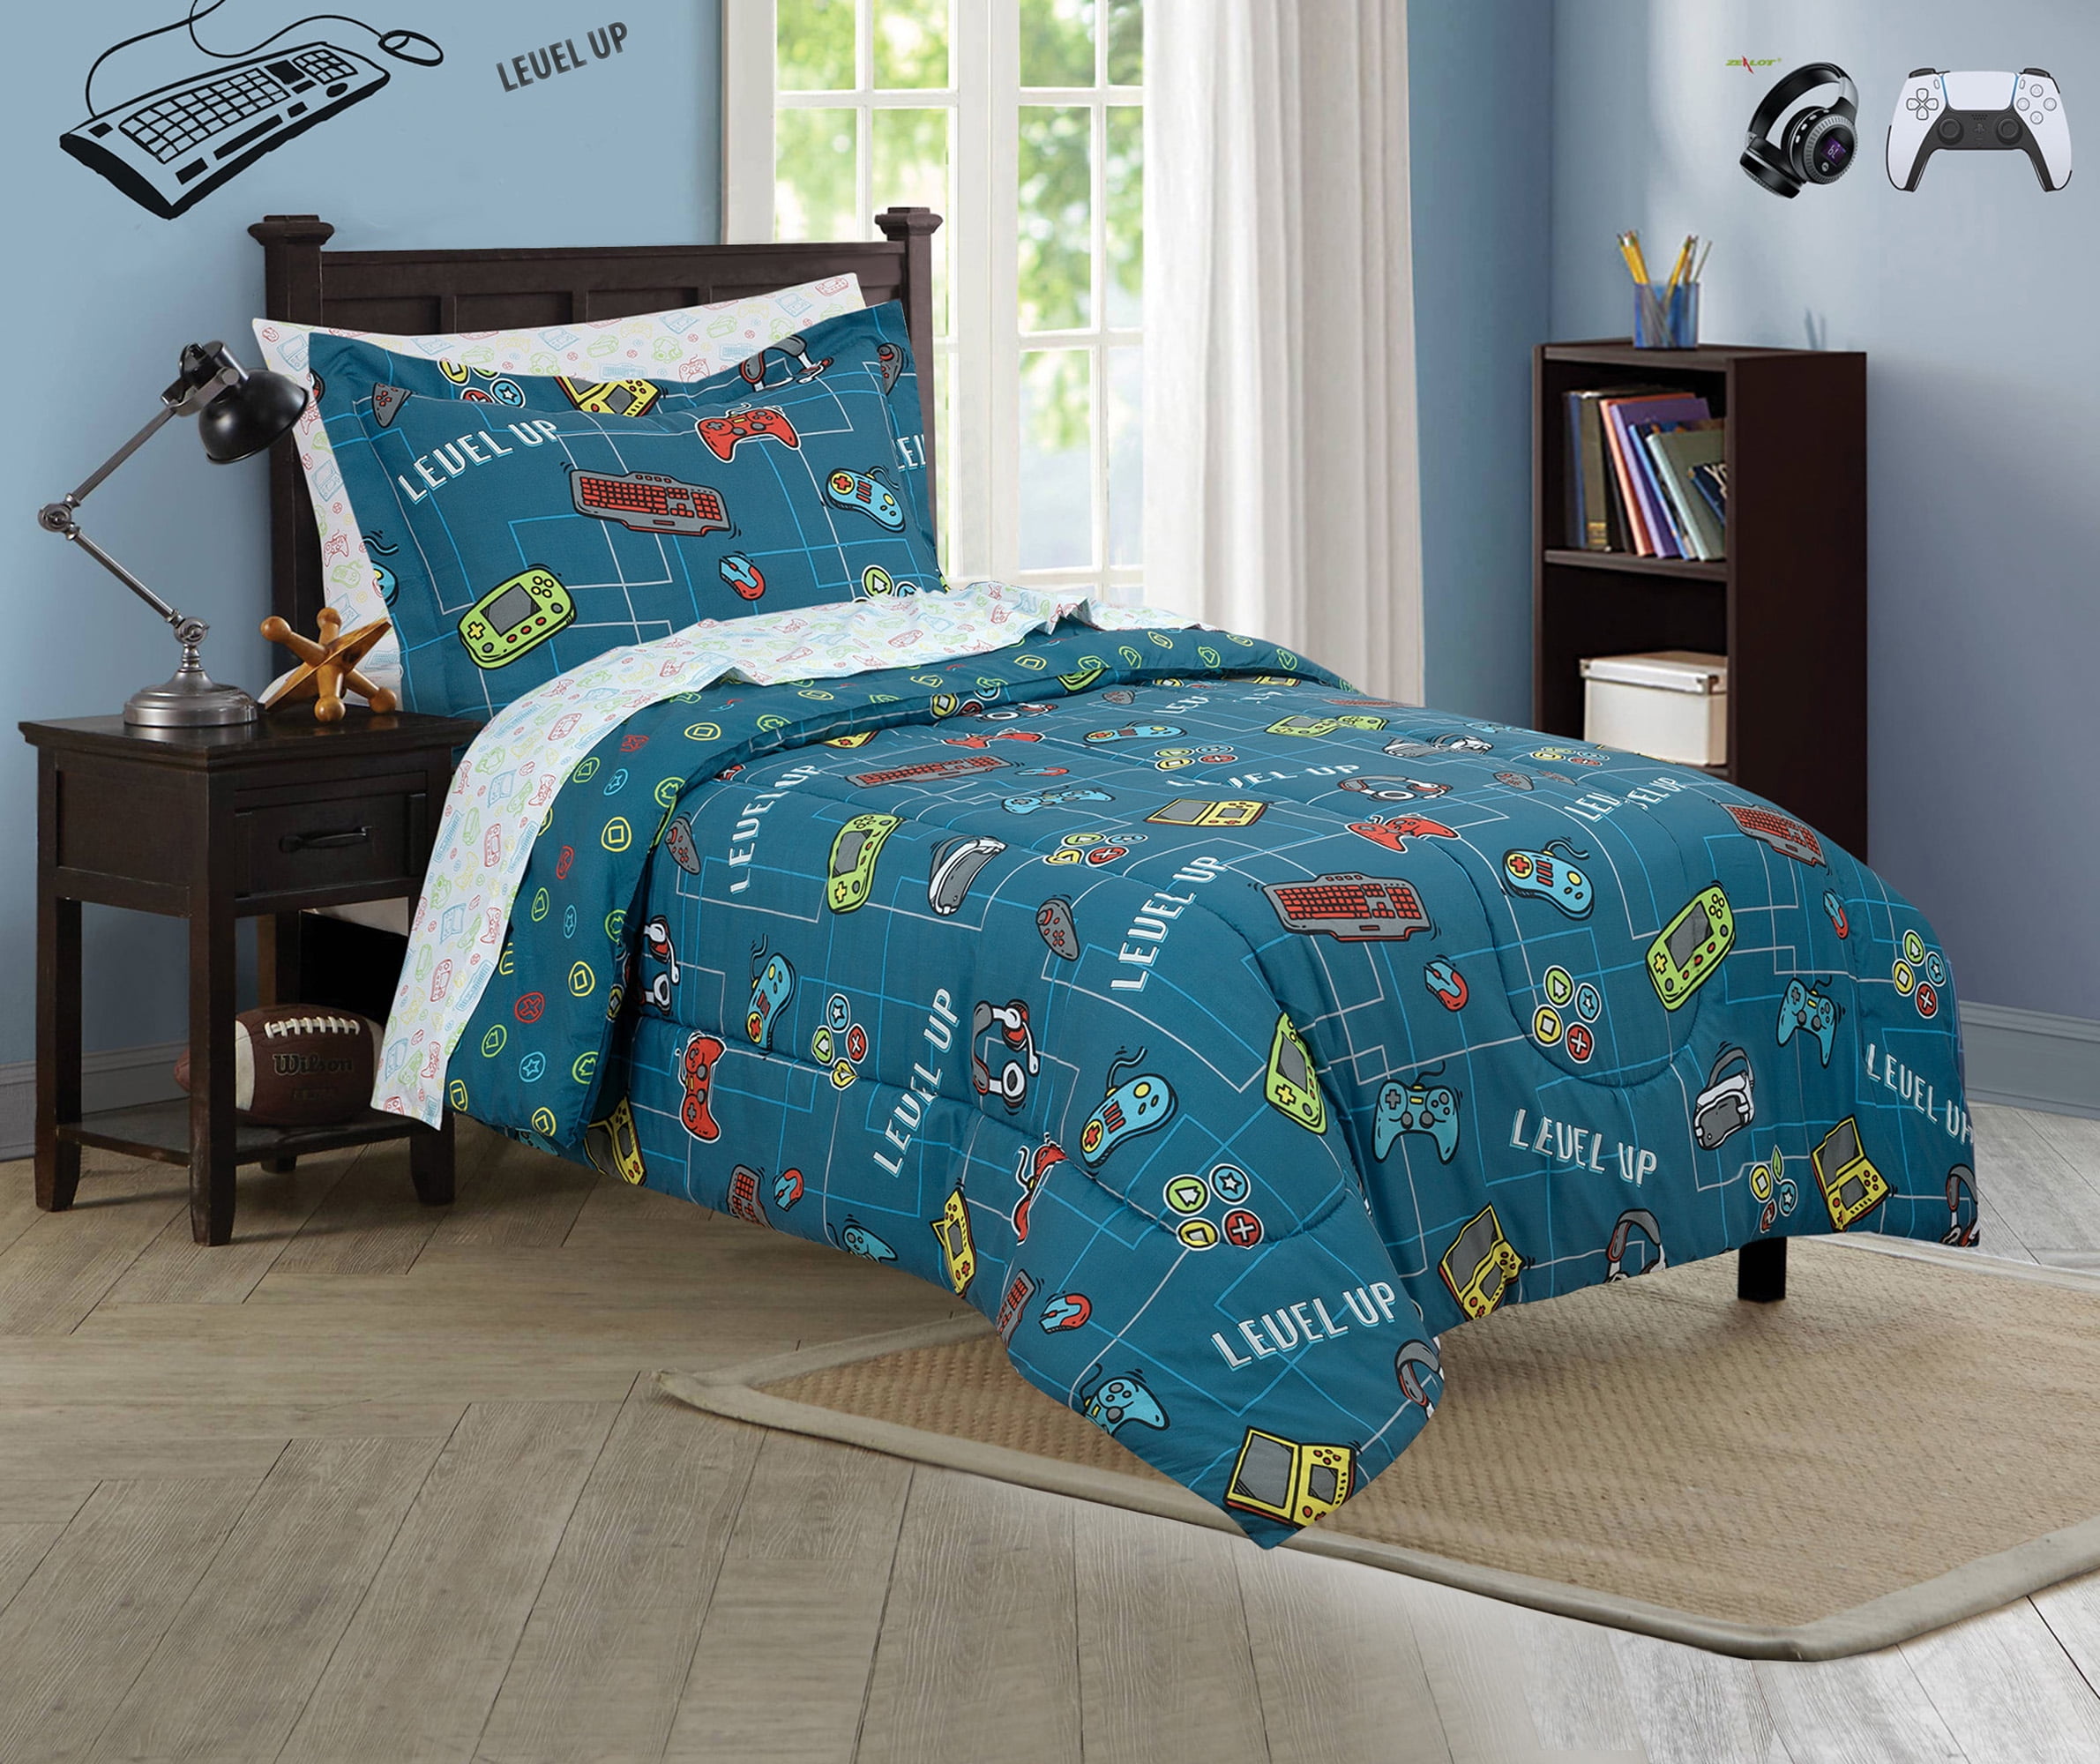 Your Zone Space Bed-in-a-Bag Coordinating Comforter Set Twin 